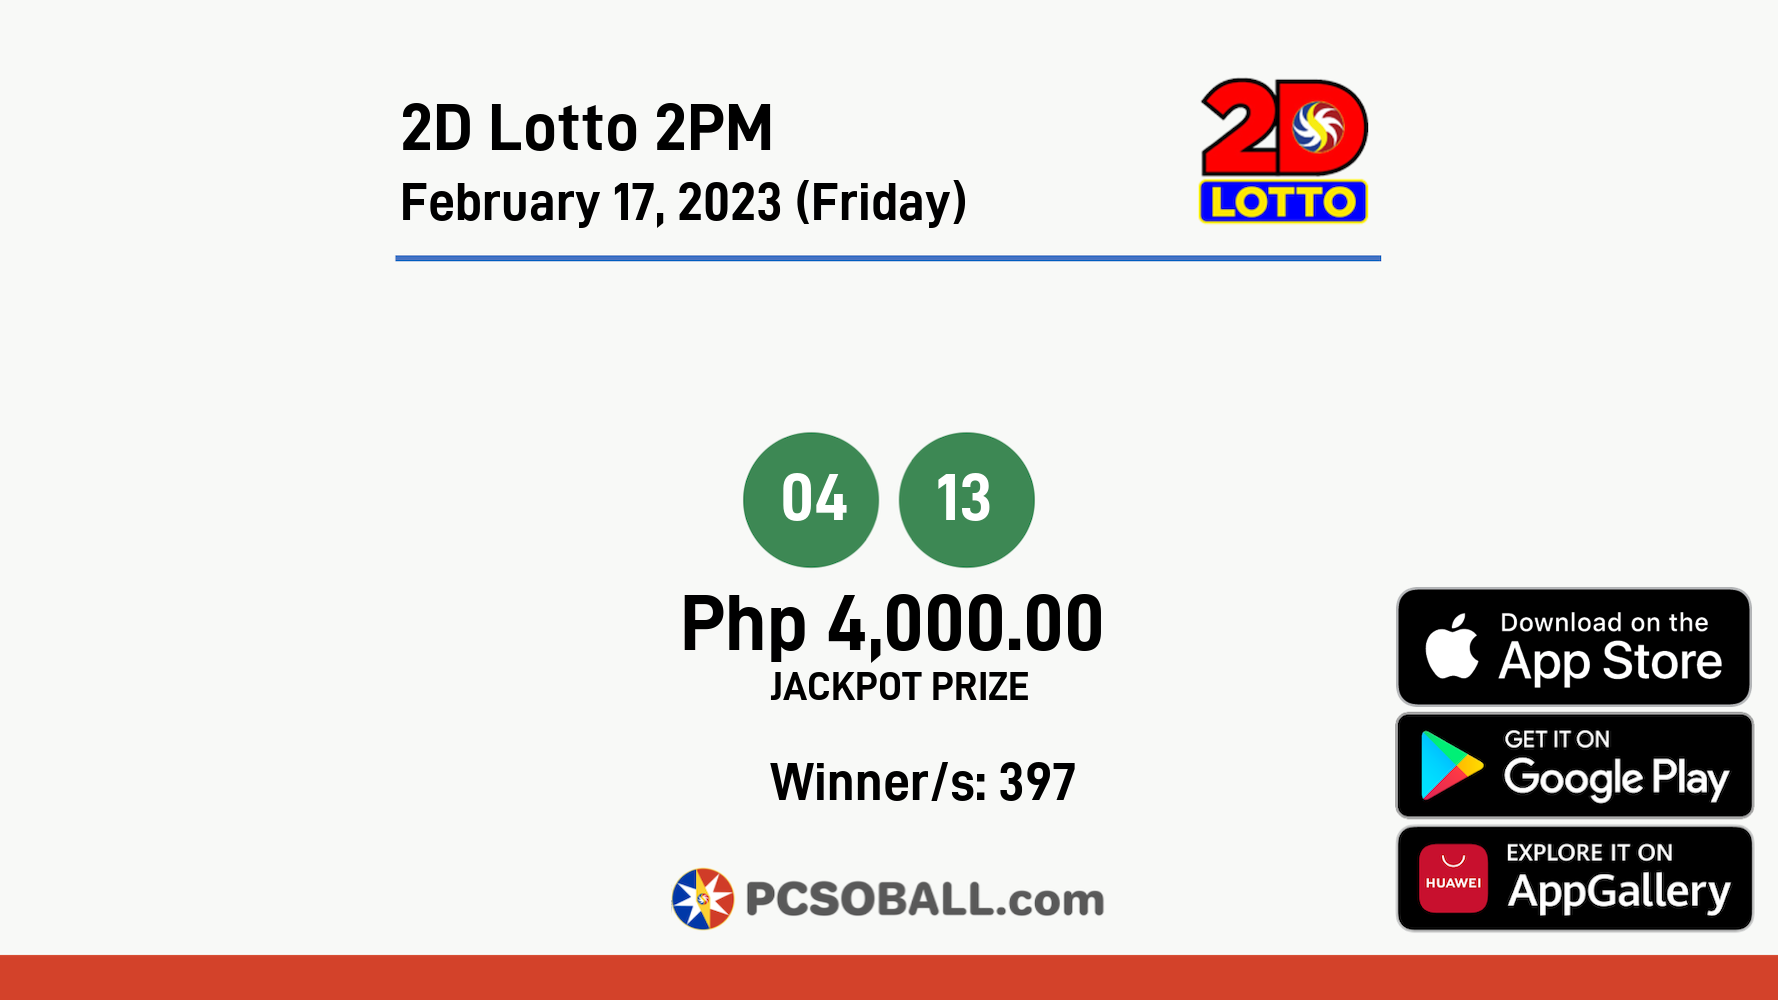 2D Lotto 2PM February 17, 2023 (Friday) Result